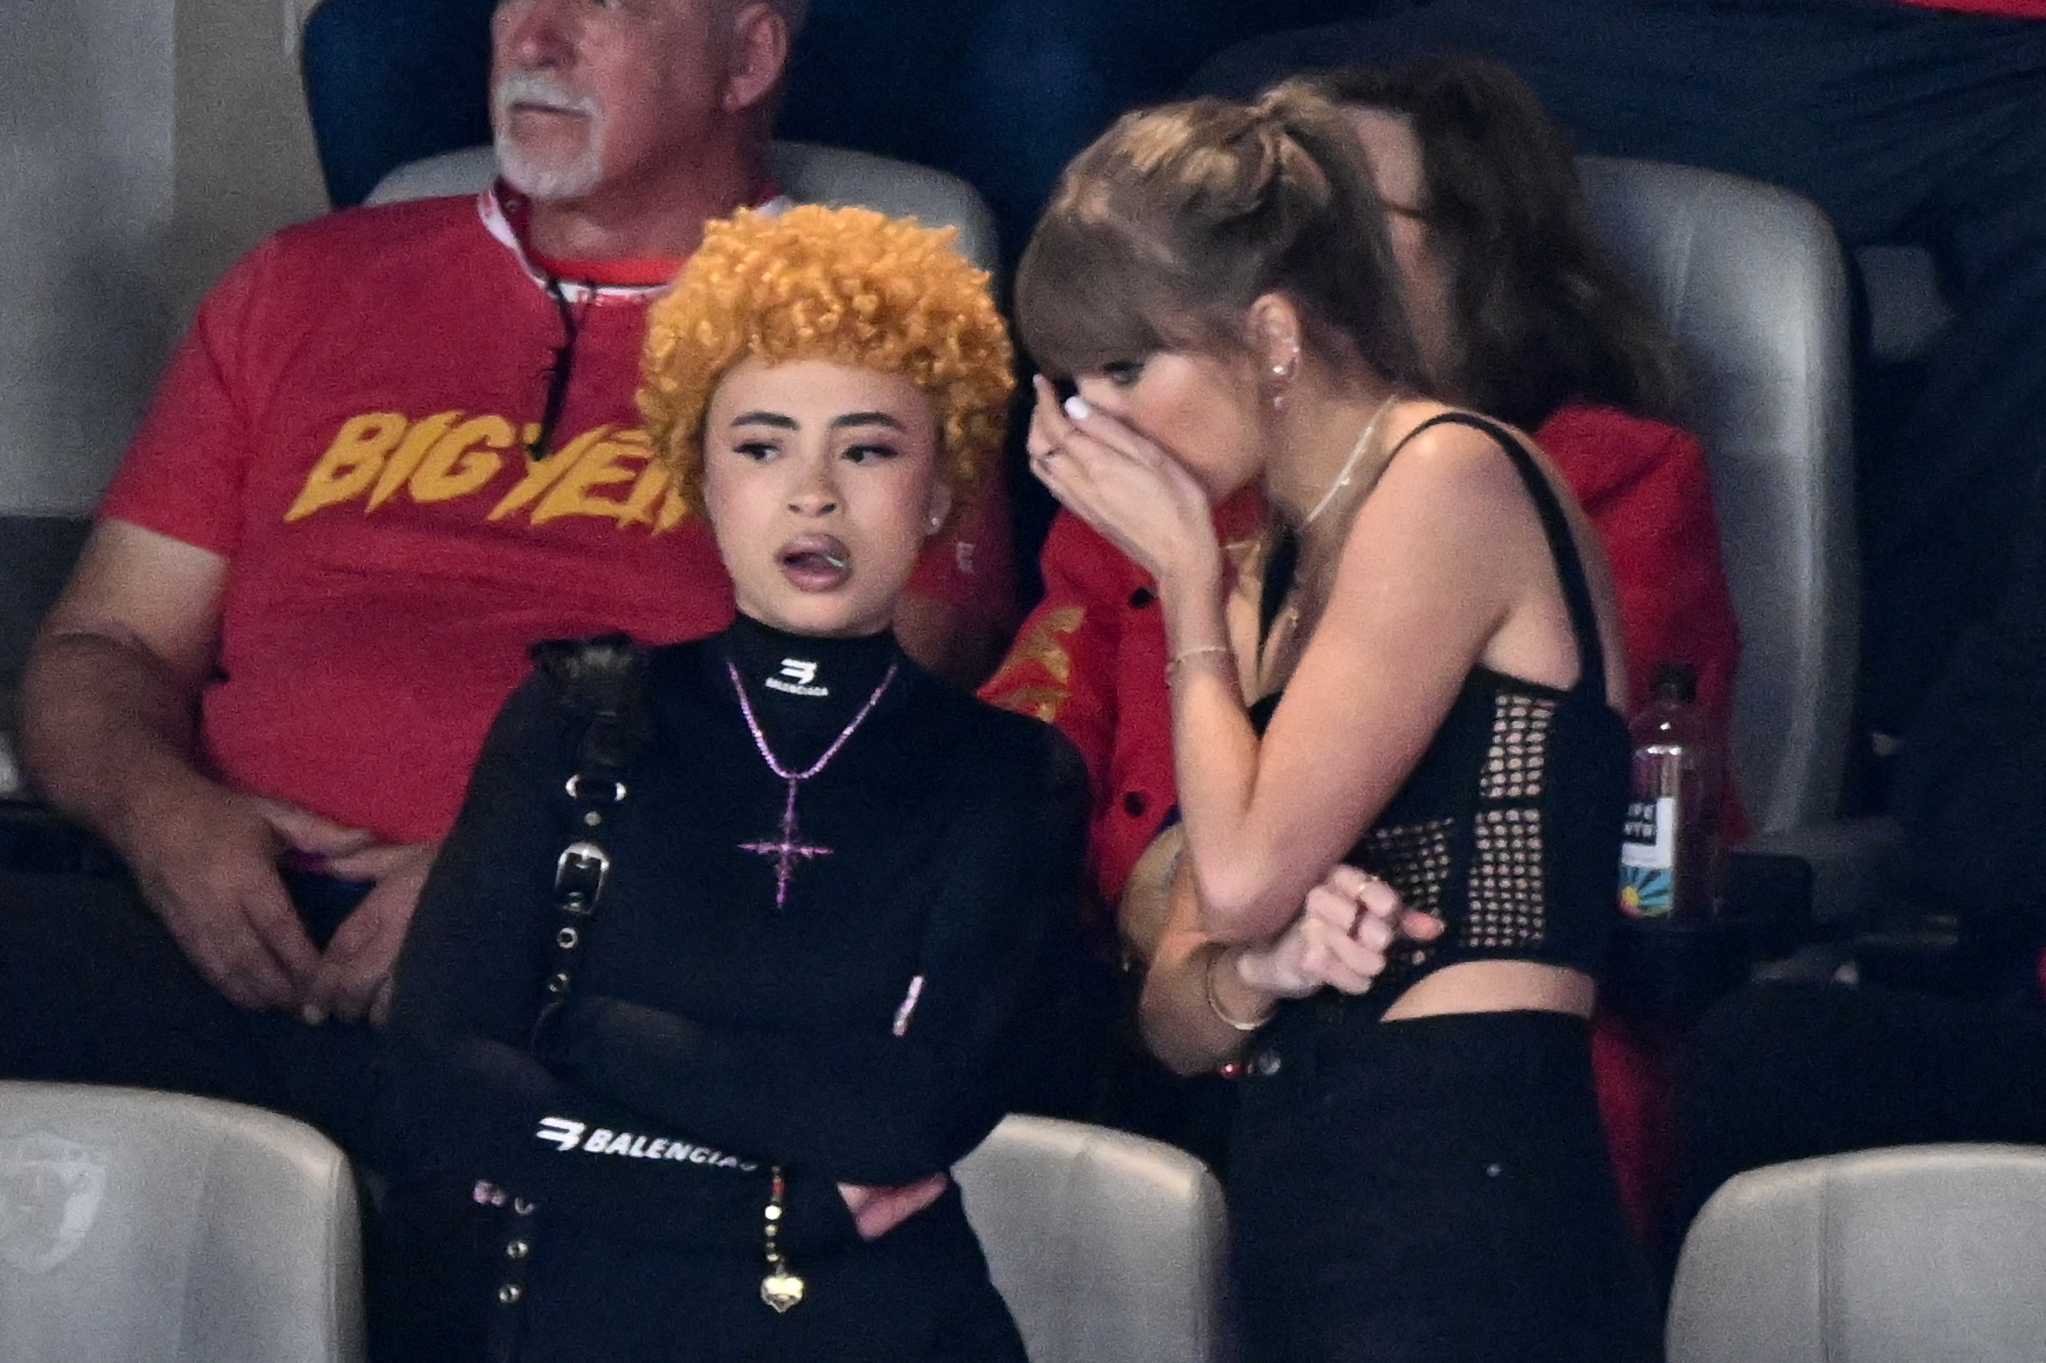 Taylor talking to Ice Spice at the Super Bowl